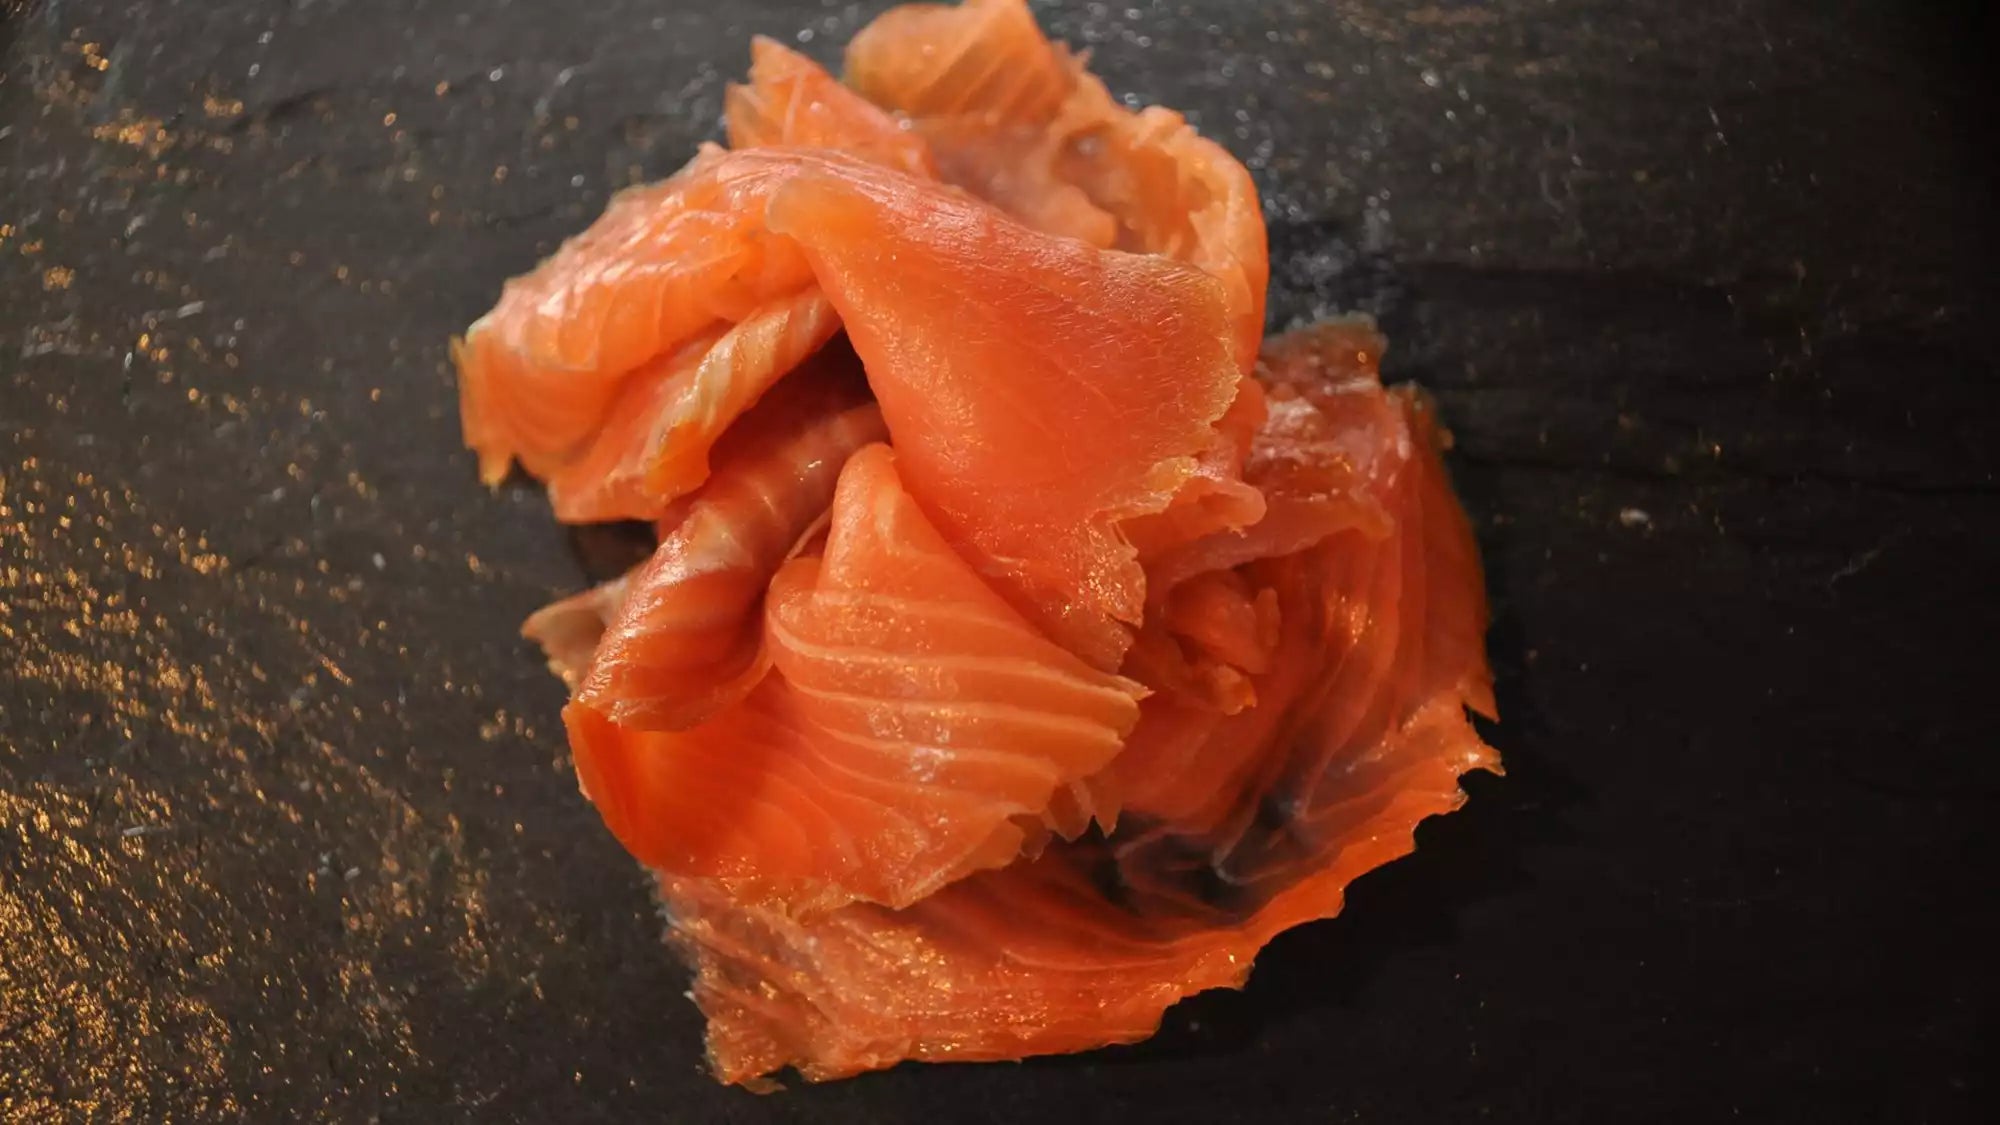 The Unforgettable Traeger Smoked Salmon Recipe